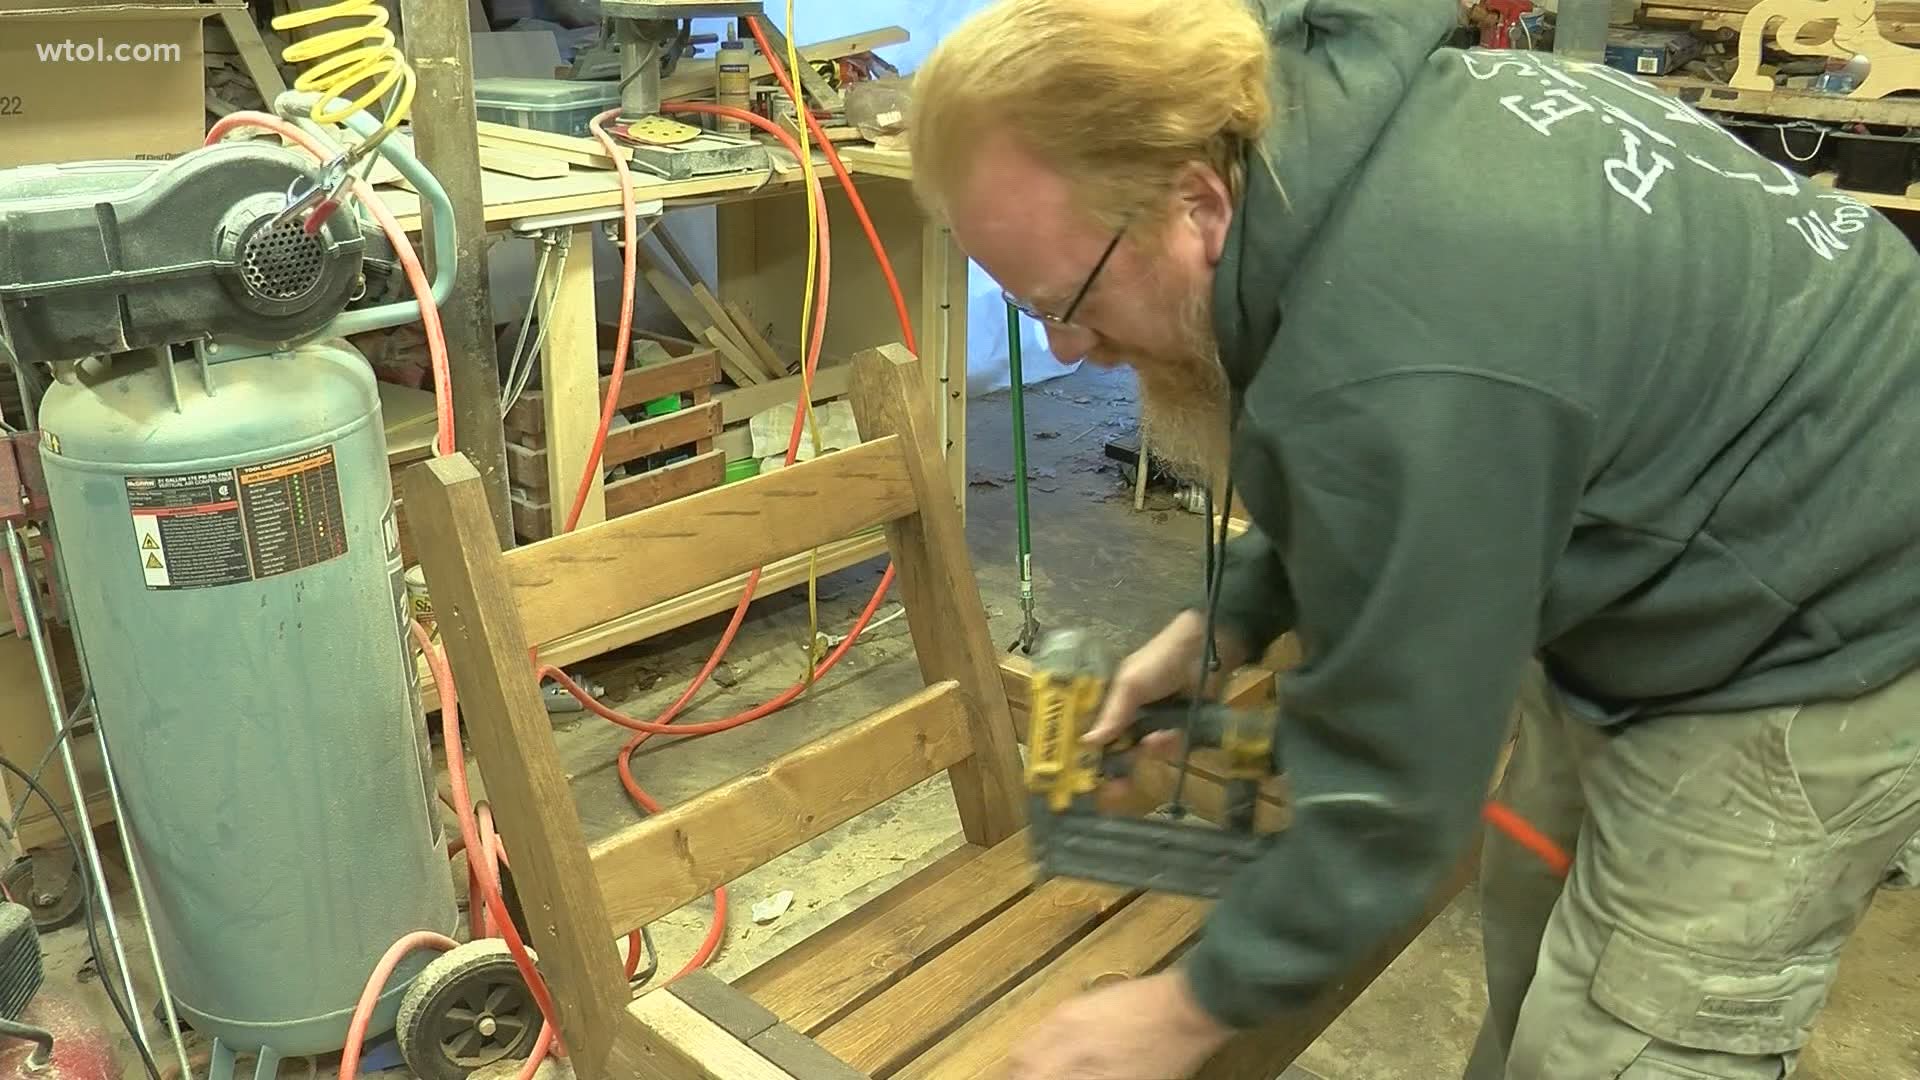 It's the second memorial bench Toledo woodworker Robb Moore has made in six months for a police officer killed in the line of duty.